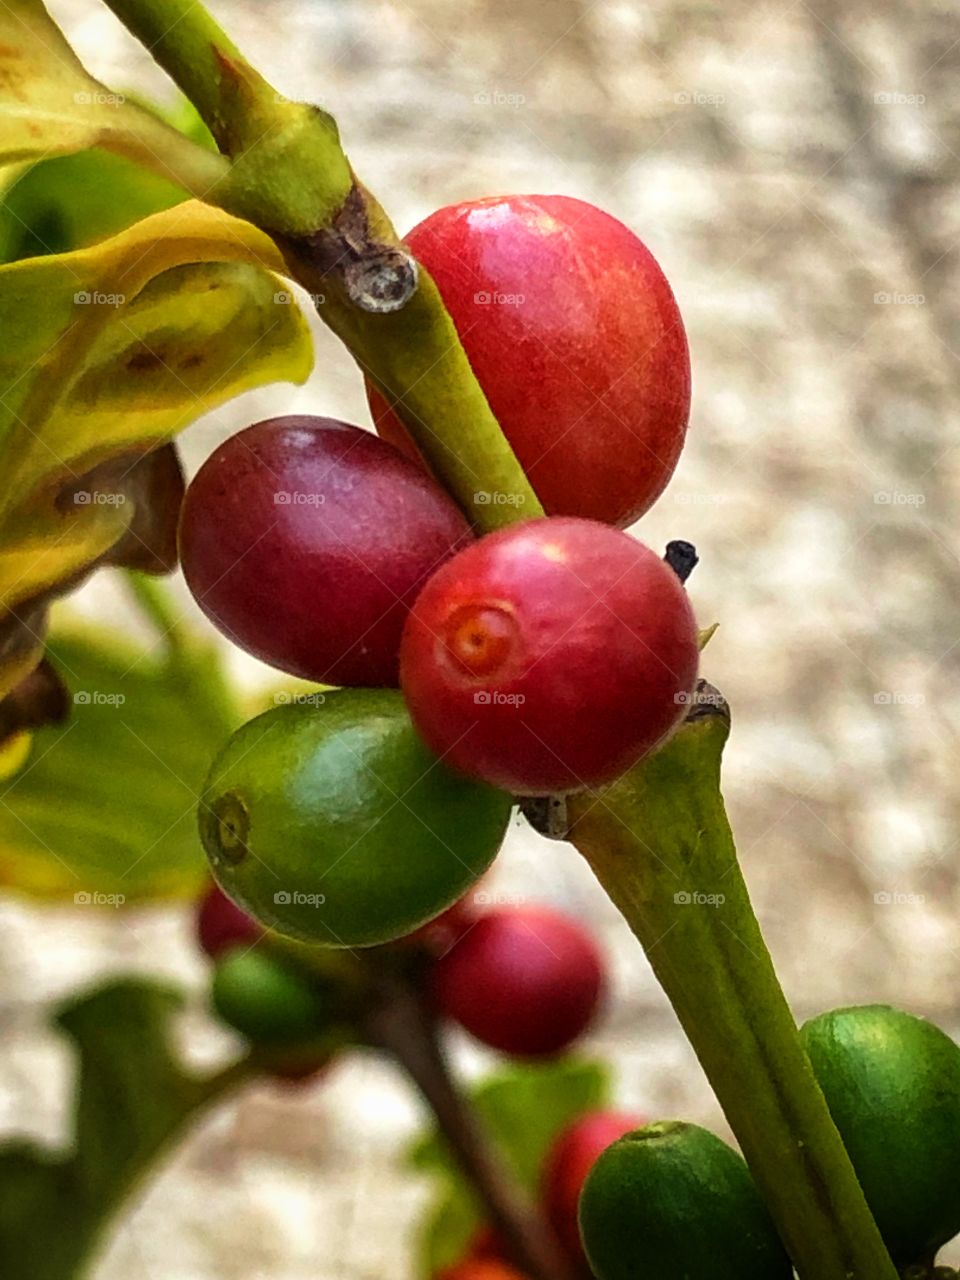 For someone who loves to drink coffee, it is fascinating to see it in the first stages: the flower, the small fruits, those fruits growing, becoming green and then red, tasting them and finding out it is sweet... From the coffee tree in my backyard.